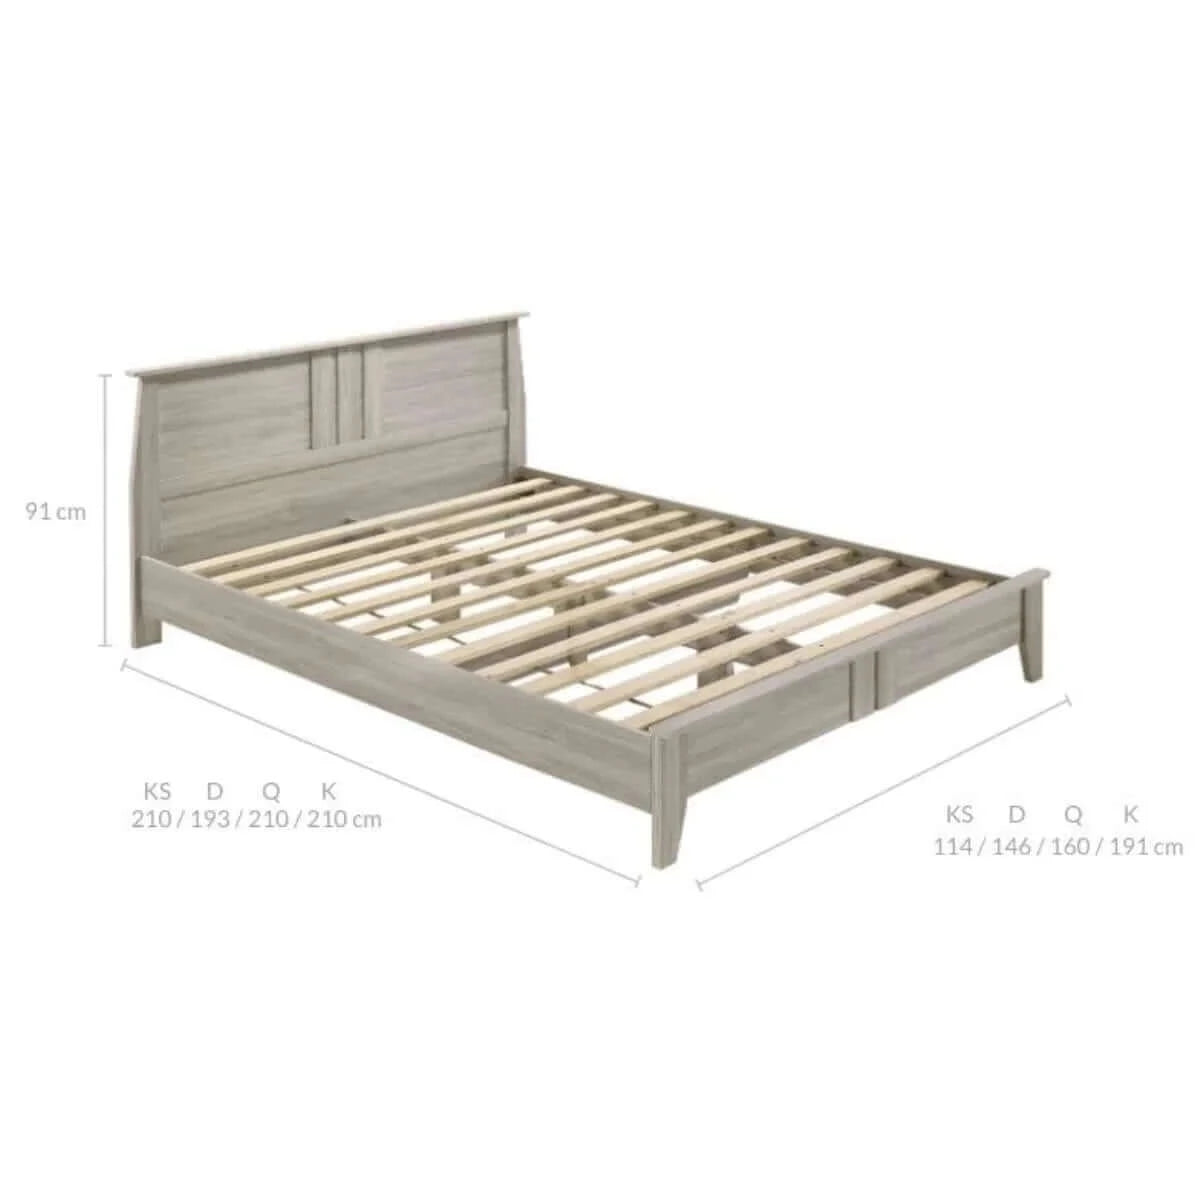 Buy double wooden bed frame base - upinteriors-Upinteriors